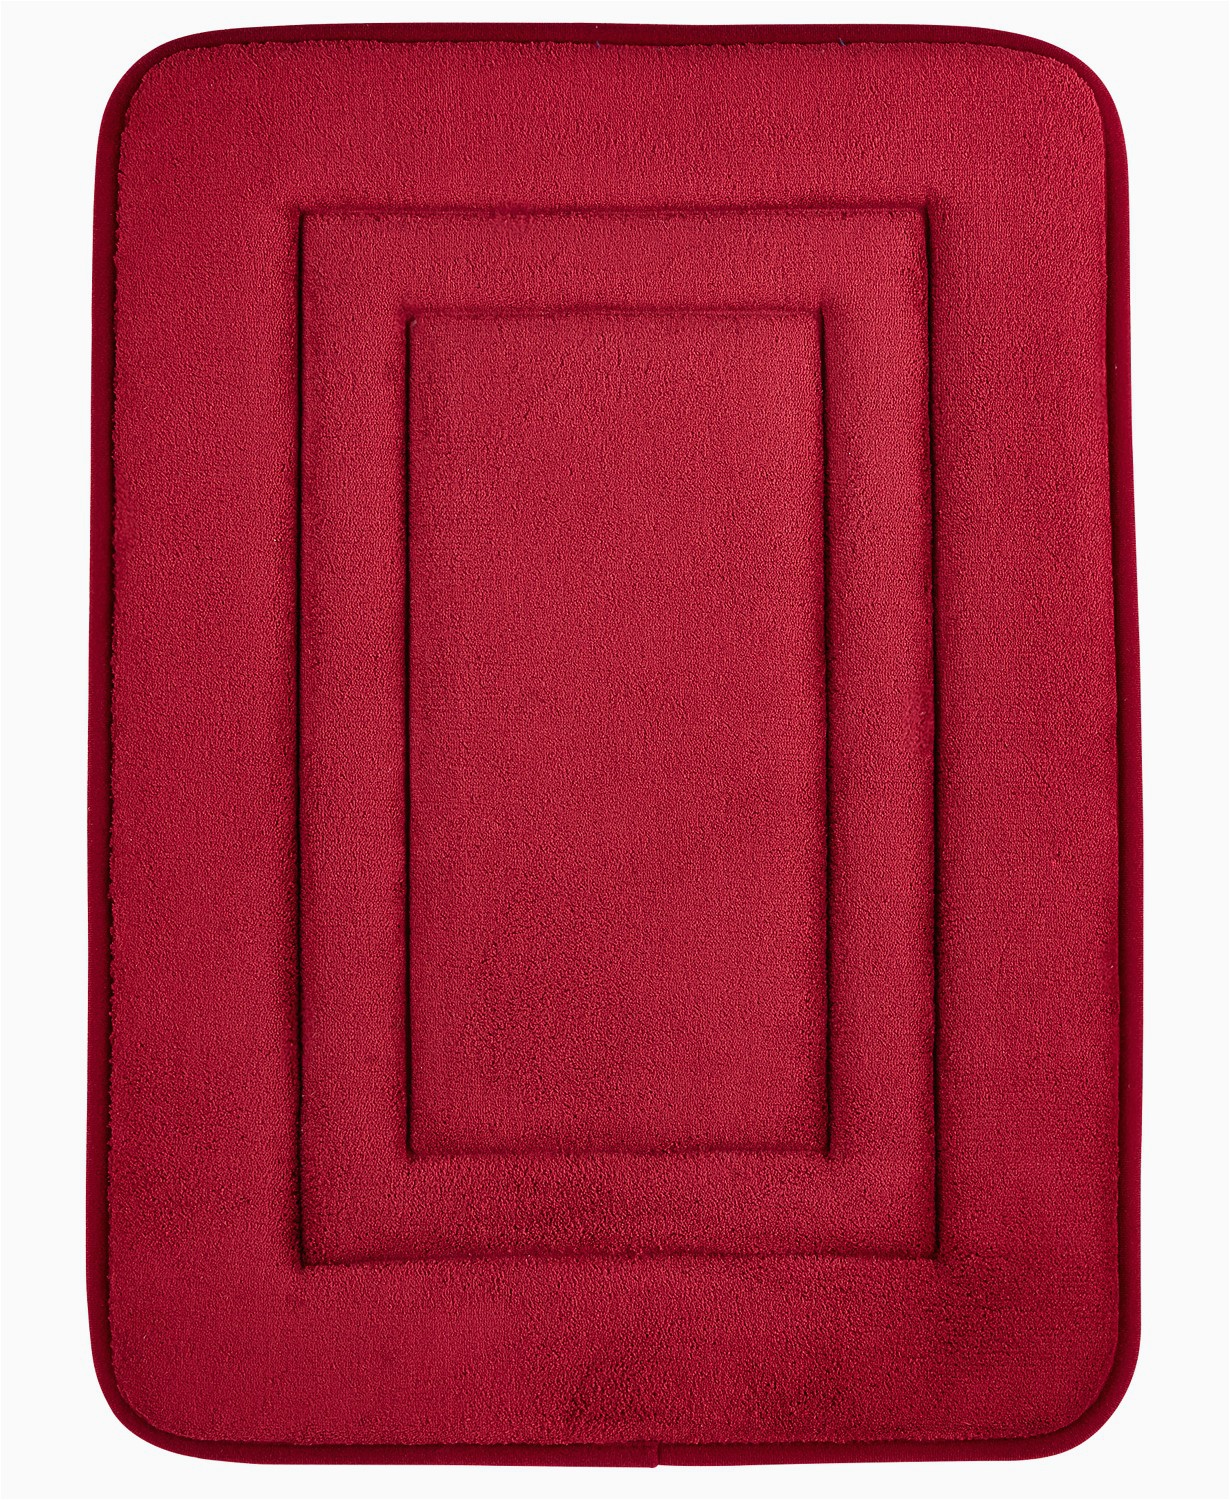 Sunham Home Fashions Bath Rug Sunham Inspire Plus Bath Rug Features Unique 3d Fiber Structure Brings Stylish and Functional Flair to Your Décor 17 Inch by 24 Inch Red